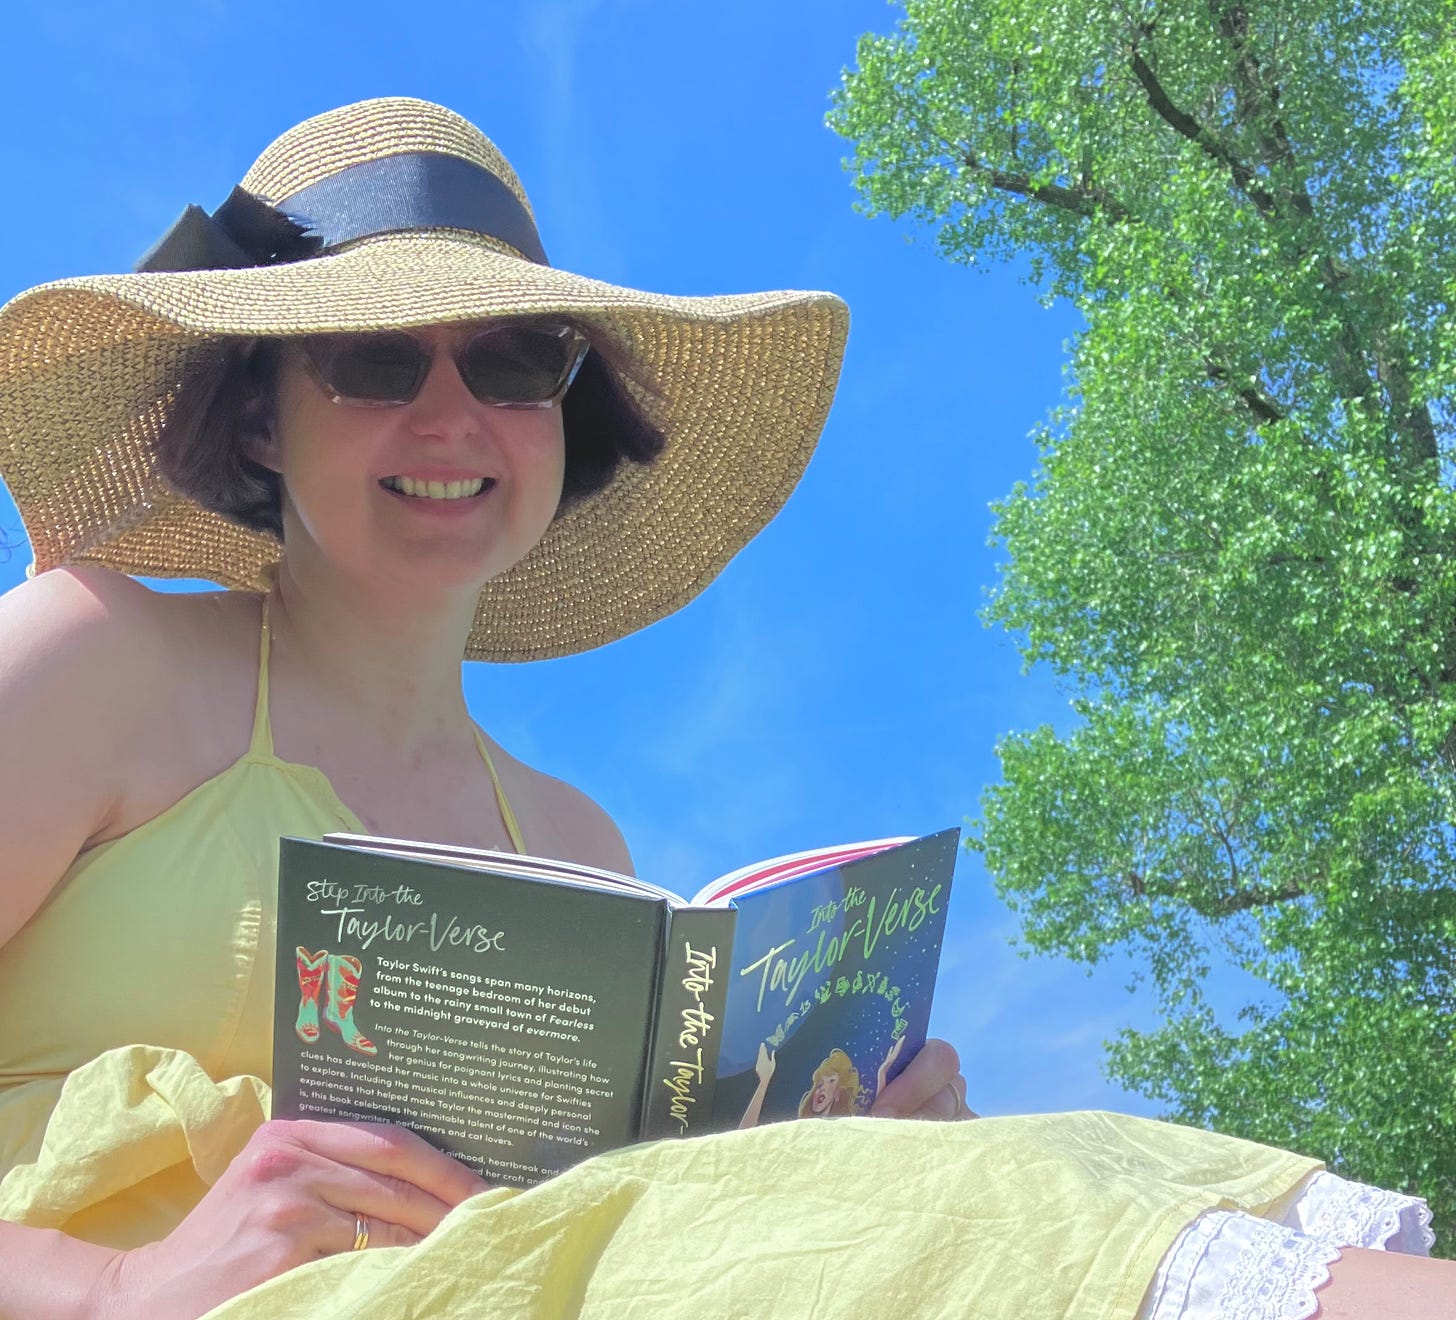 A smiling woman sitting in the park, holding a book